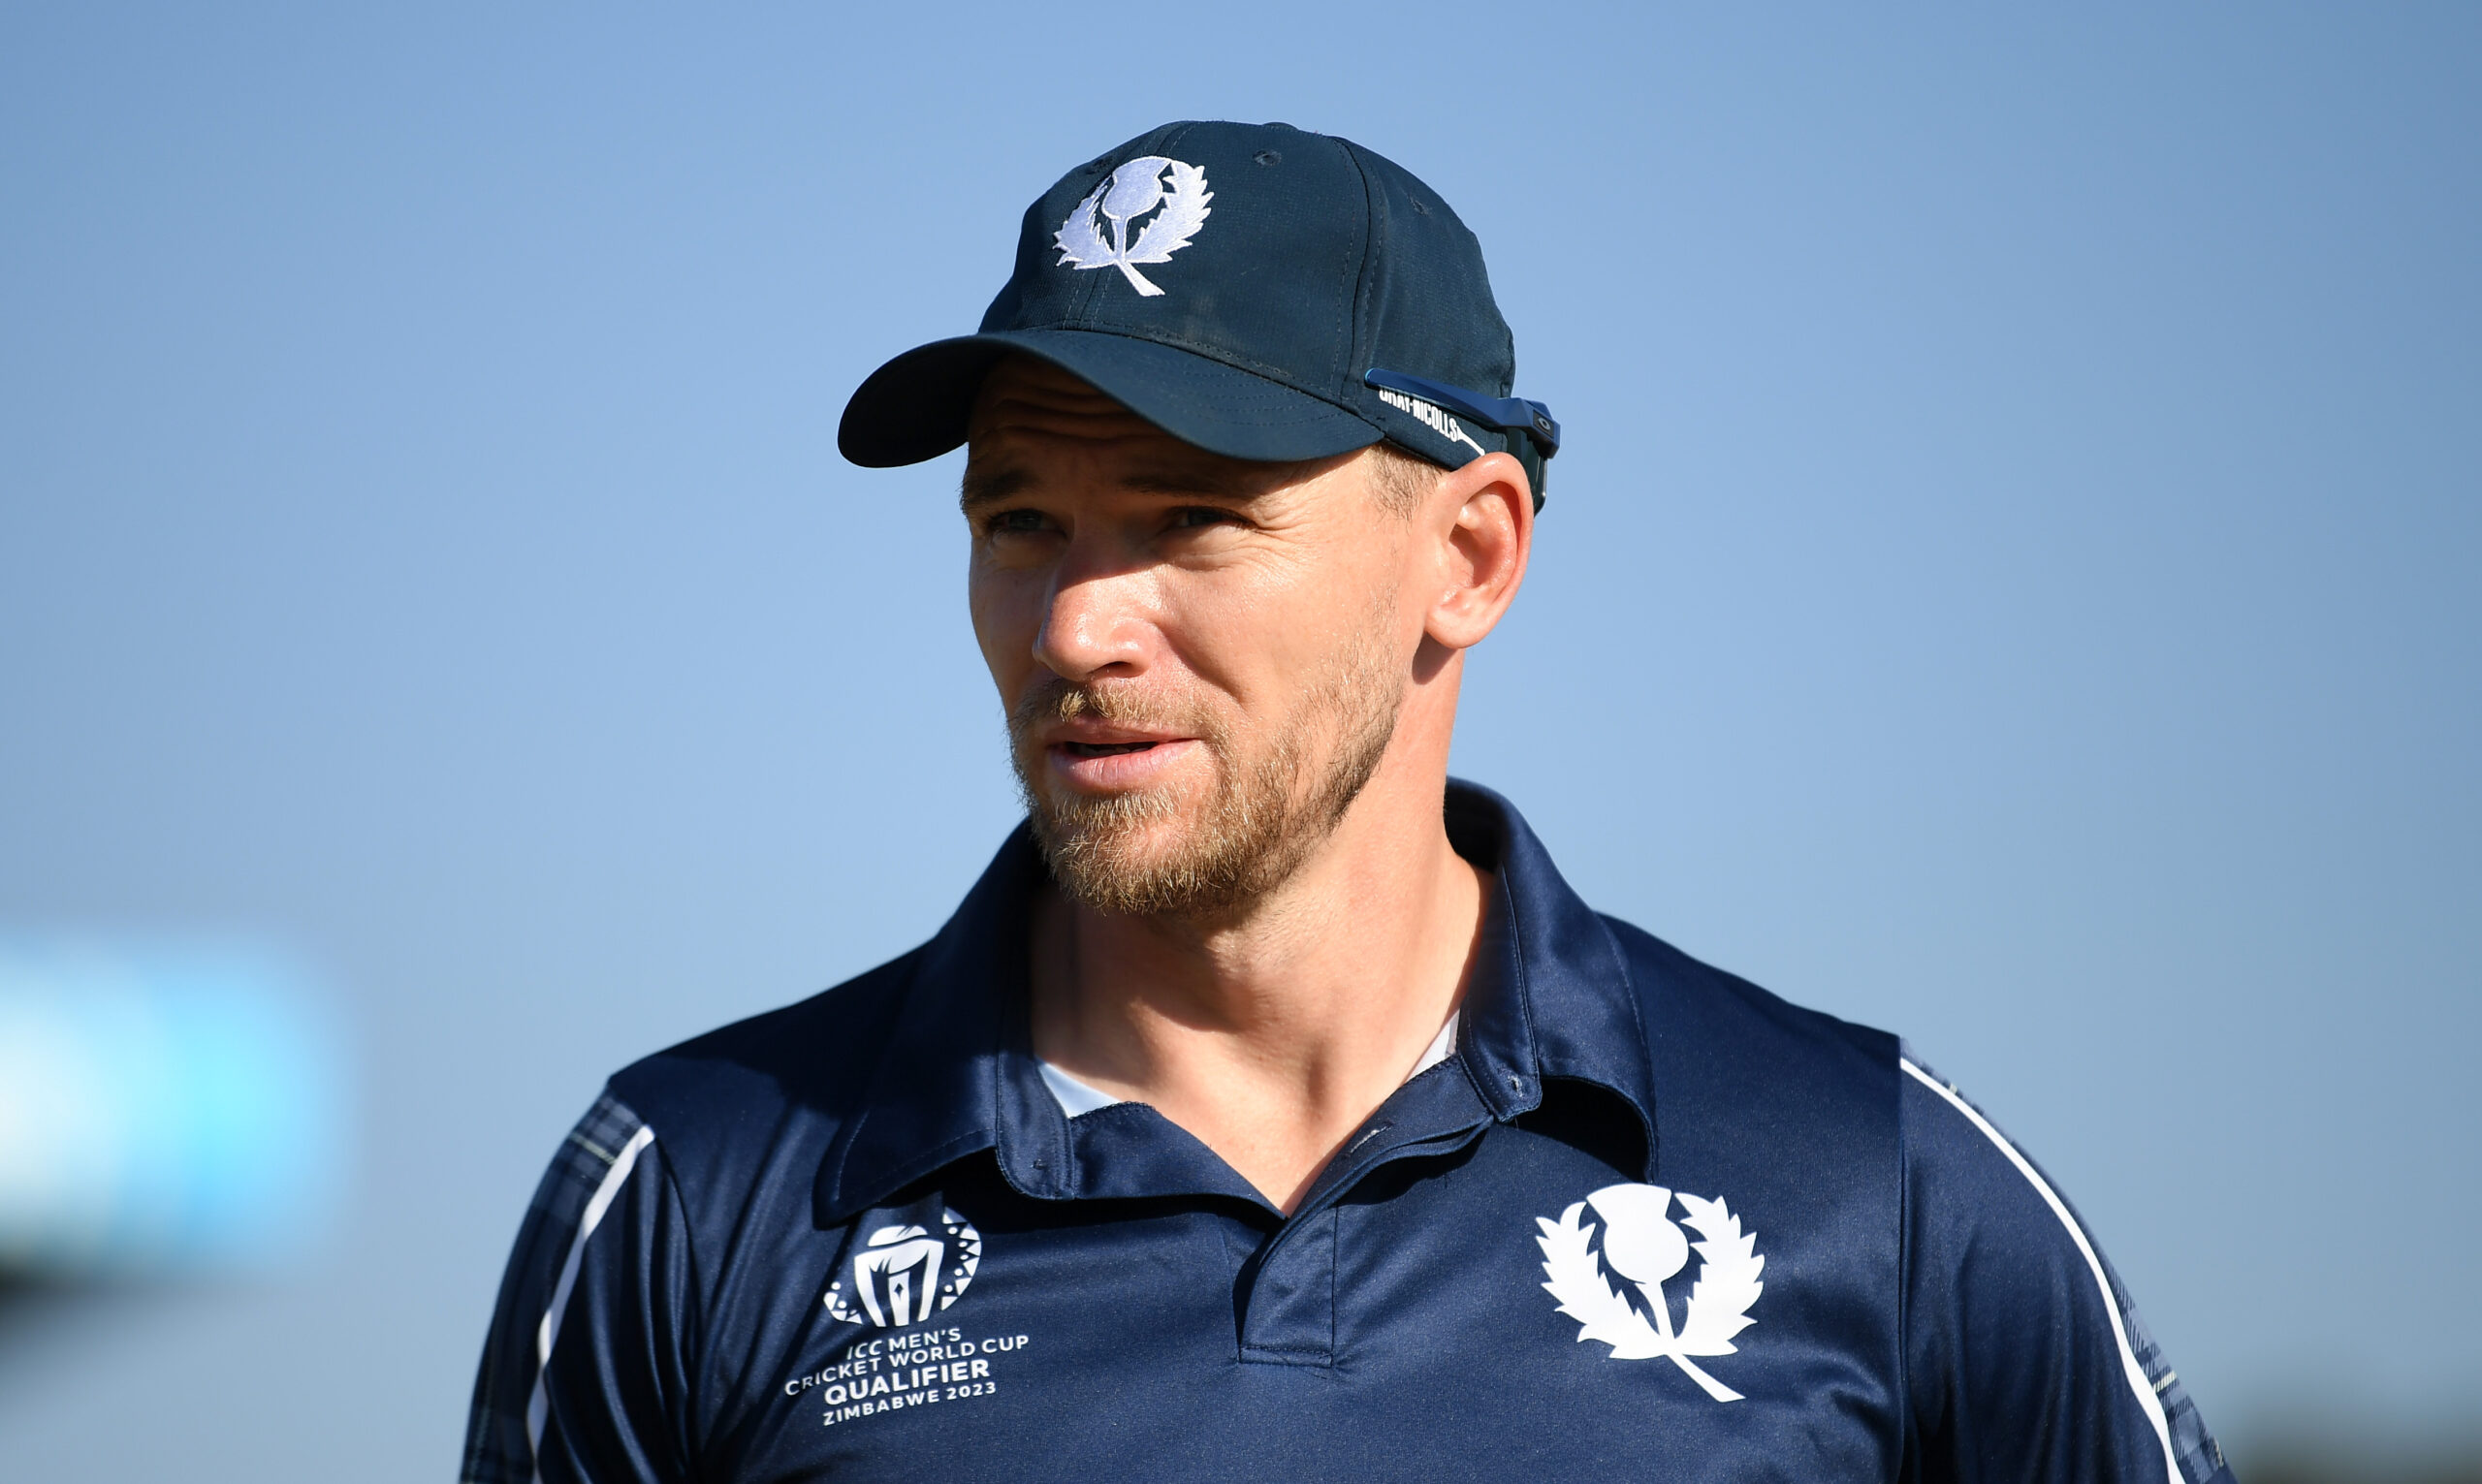 SCOTLAND SQUAD NAMED FOR ICC MEN’S T20 WORLD CUP EUROPE QUALIFIER